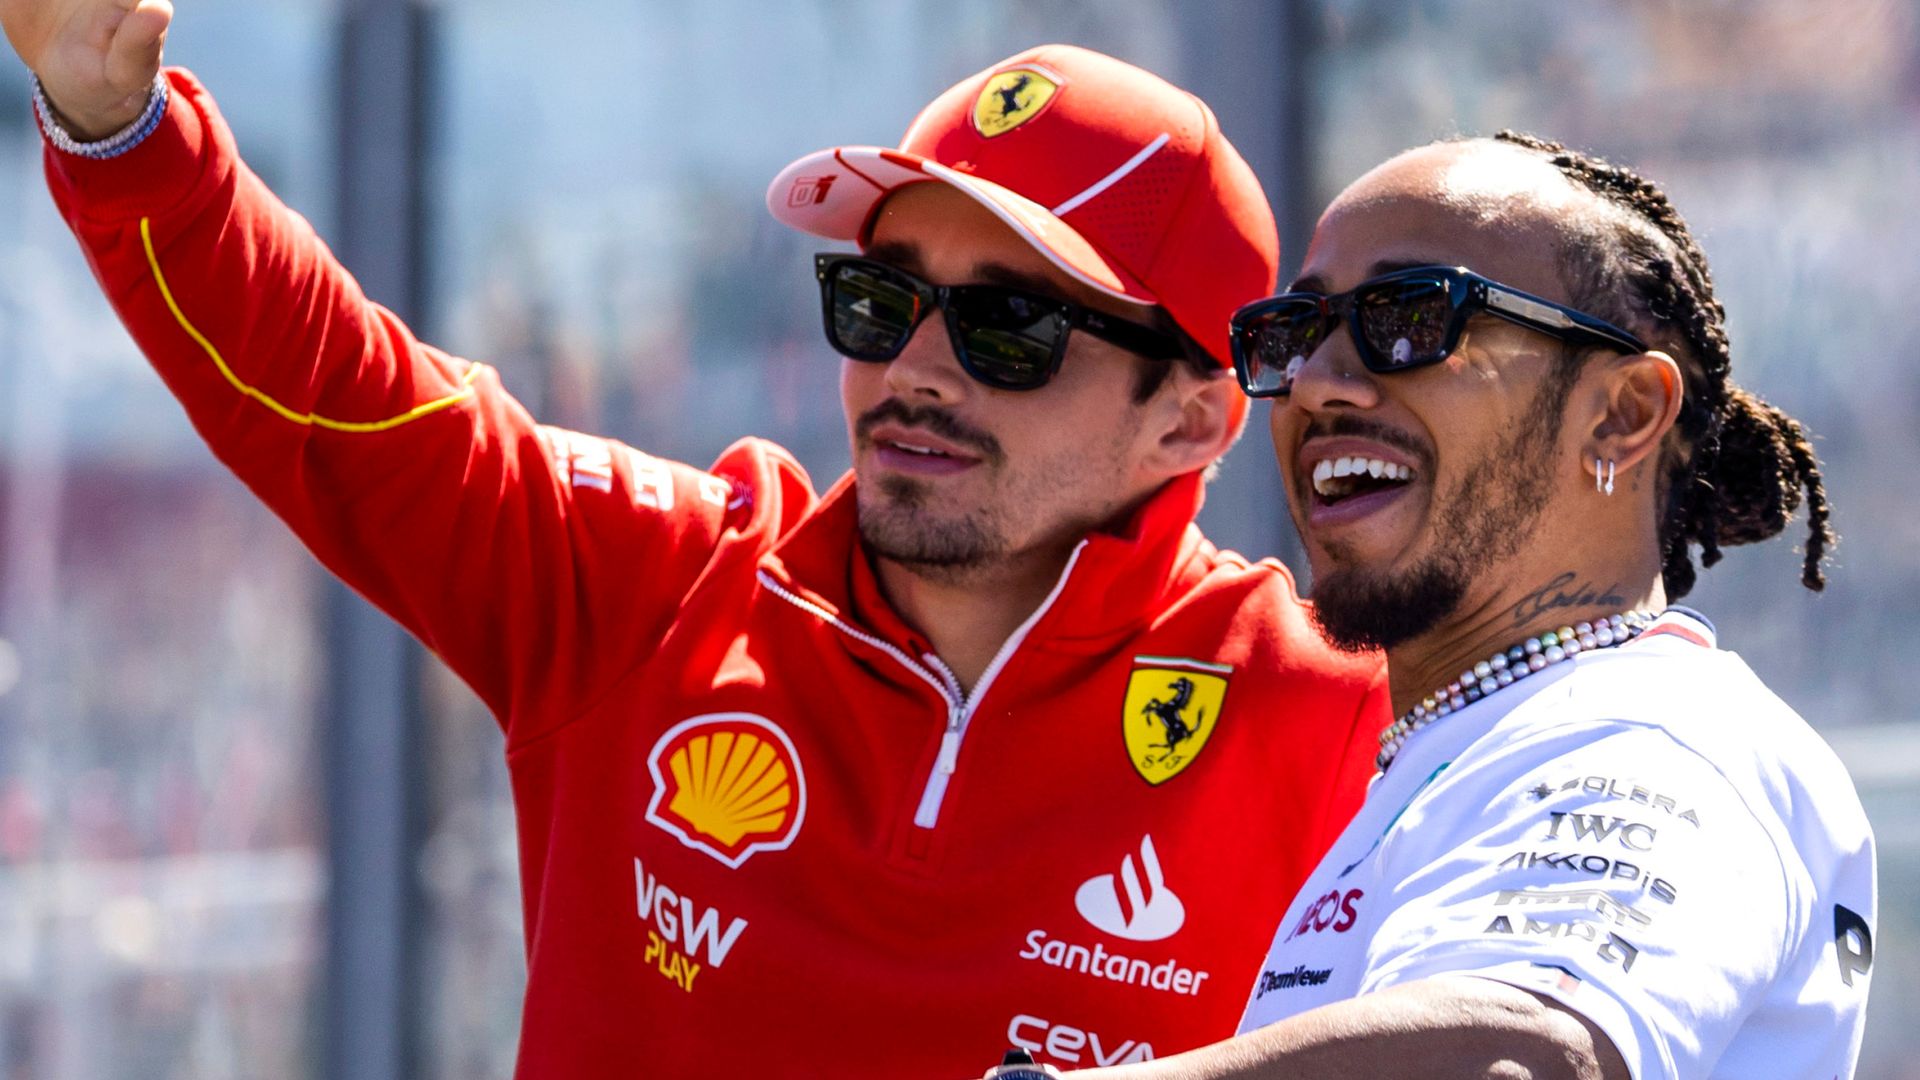 Steiner: Hamilton has made right decision | Title possible with Ferrari